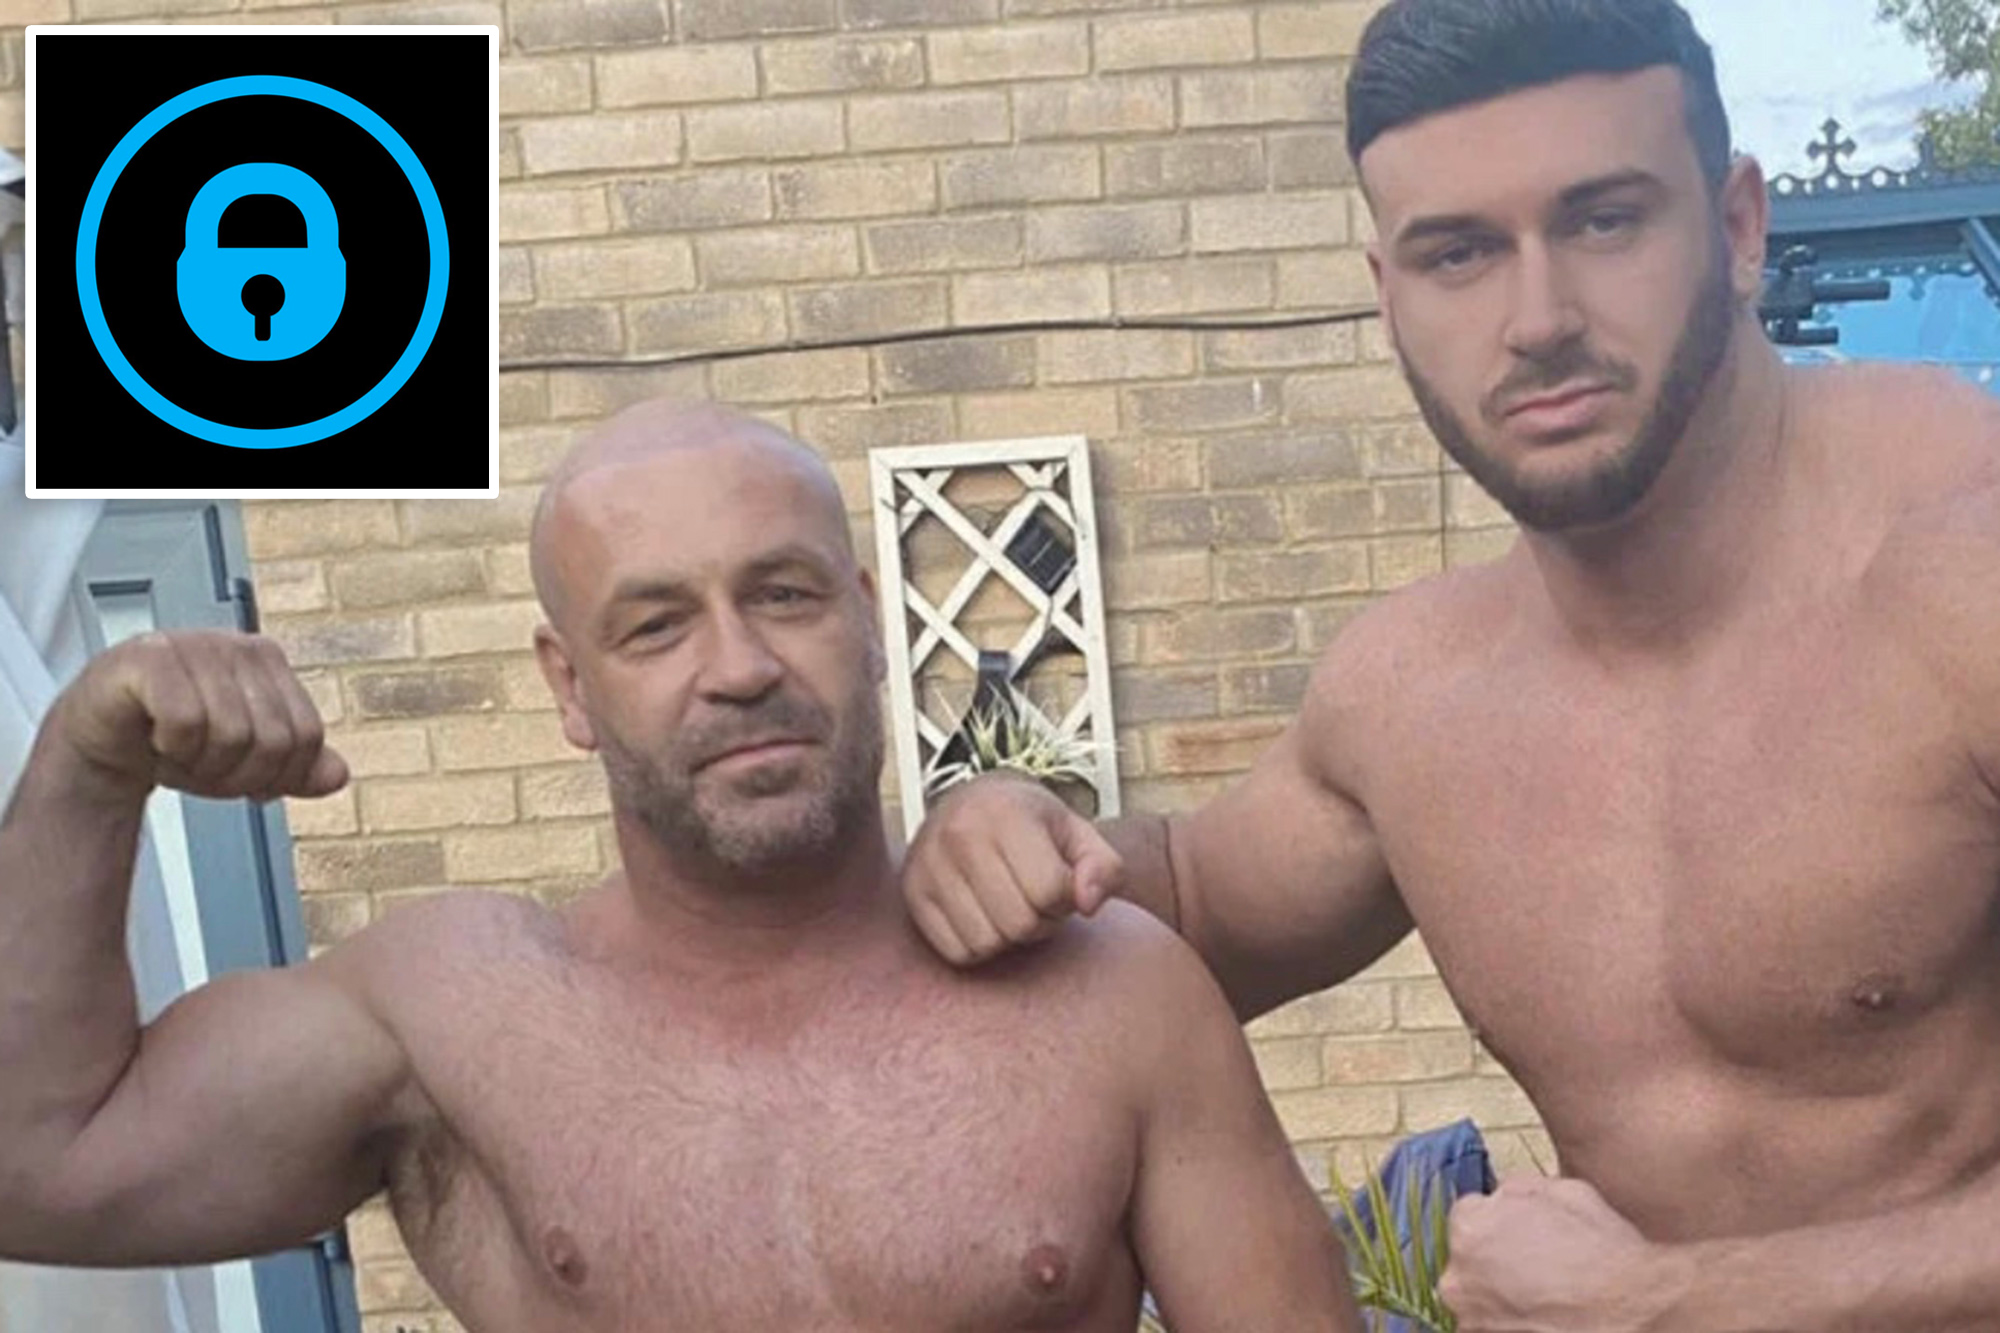 denise d recommends Dad And Son Naked Together